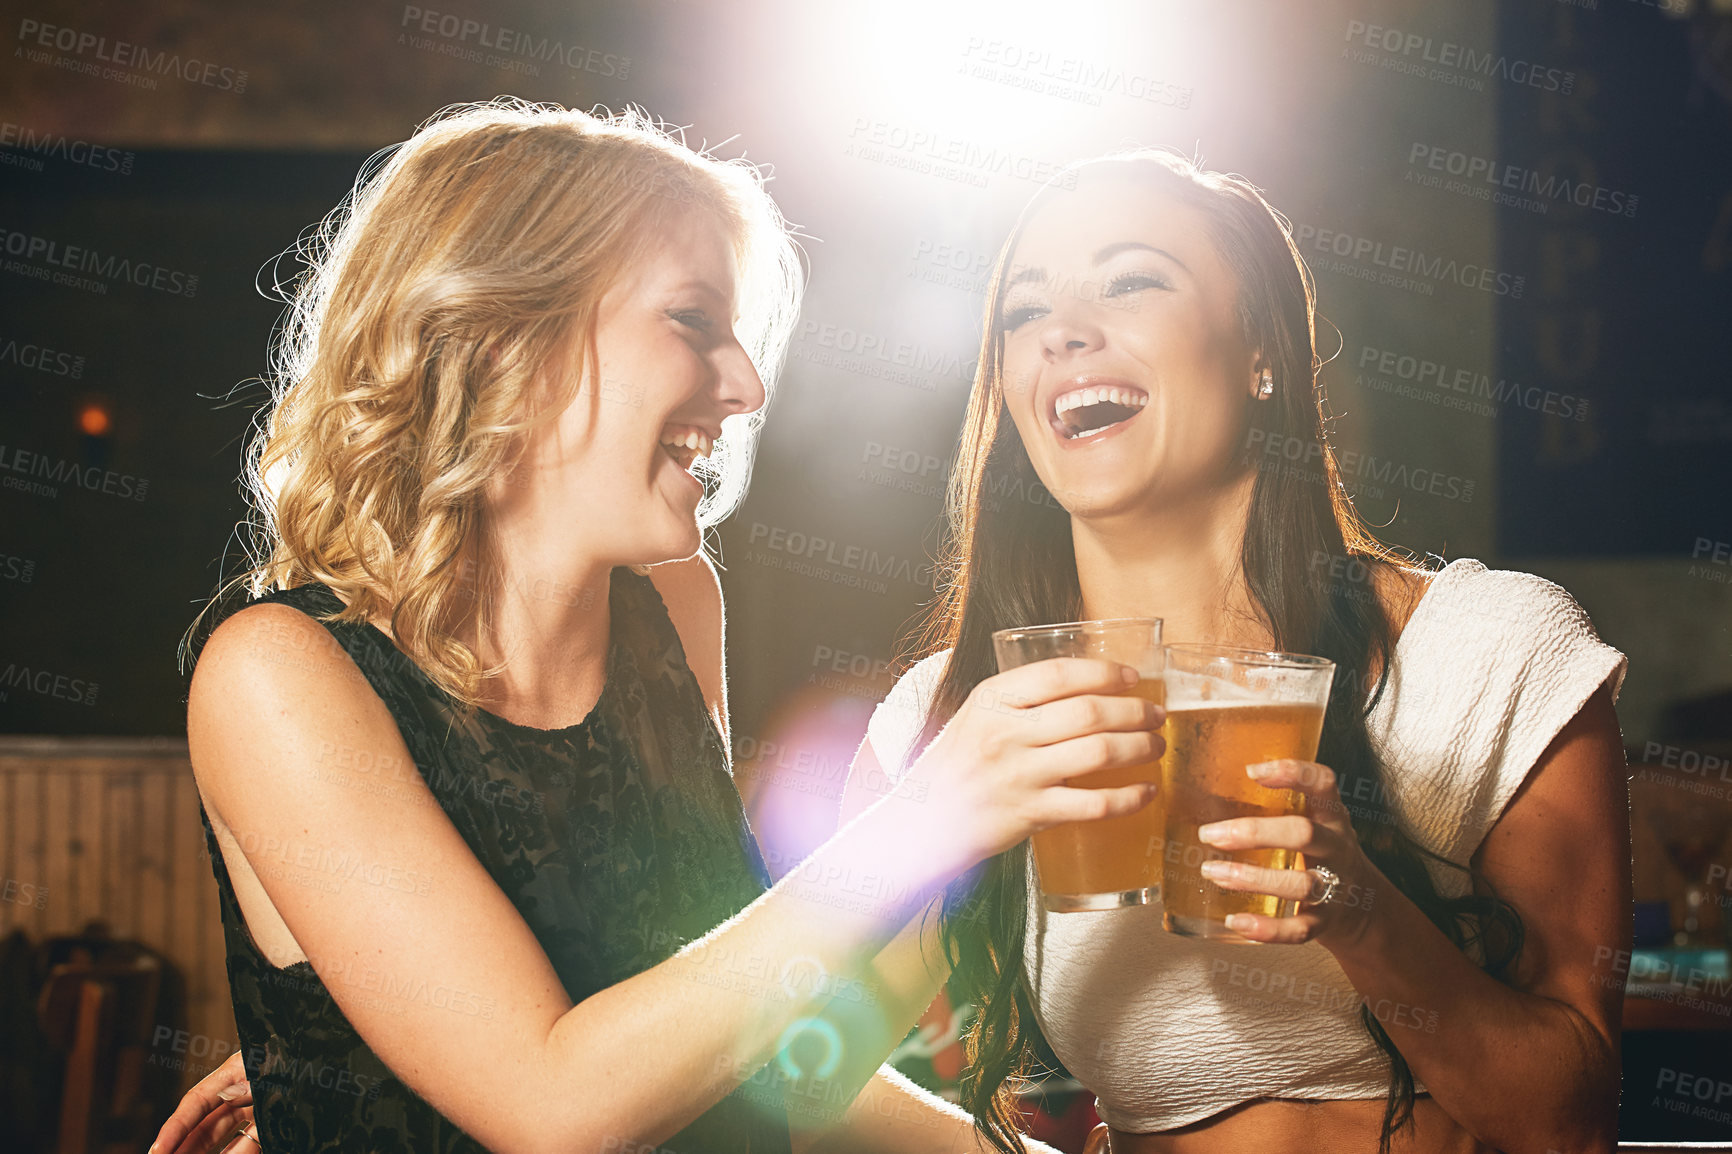 Buy stock photo Shot of two young women enjoying a beer together in a nightclub